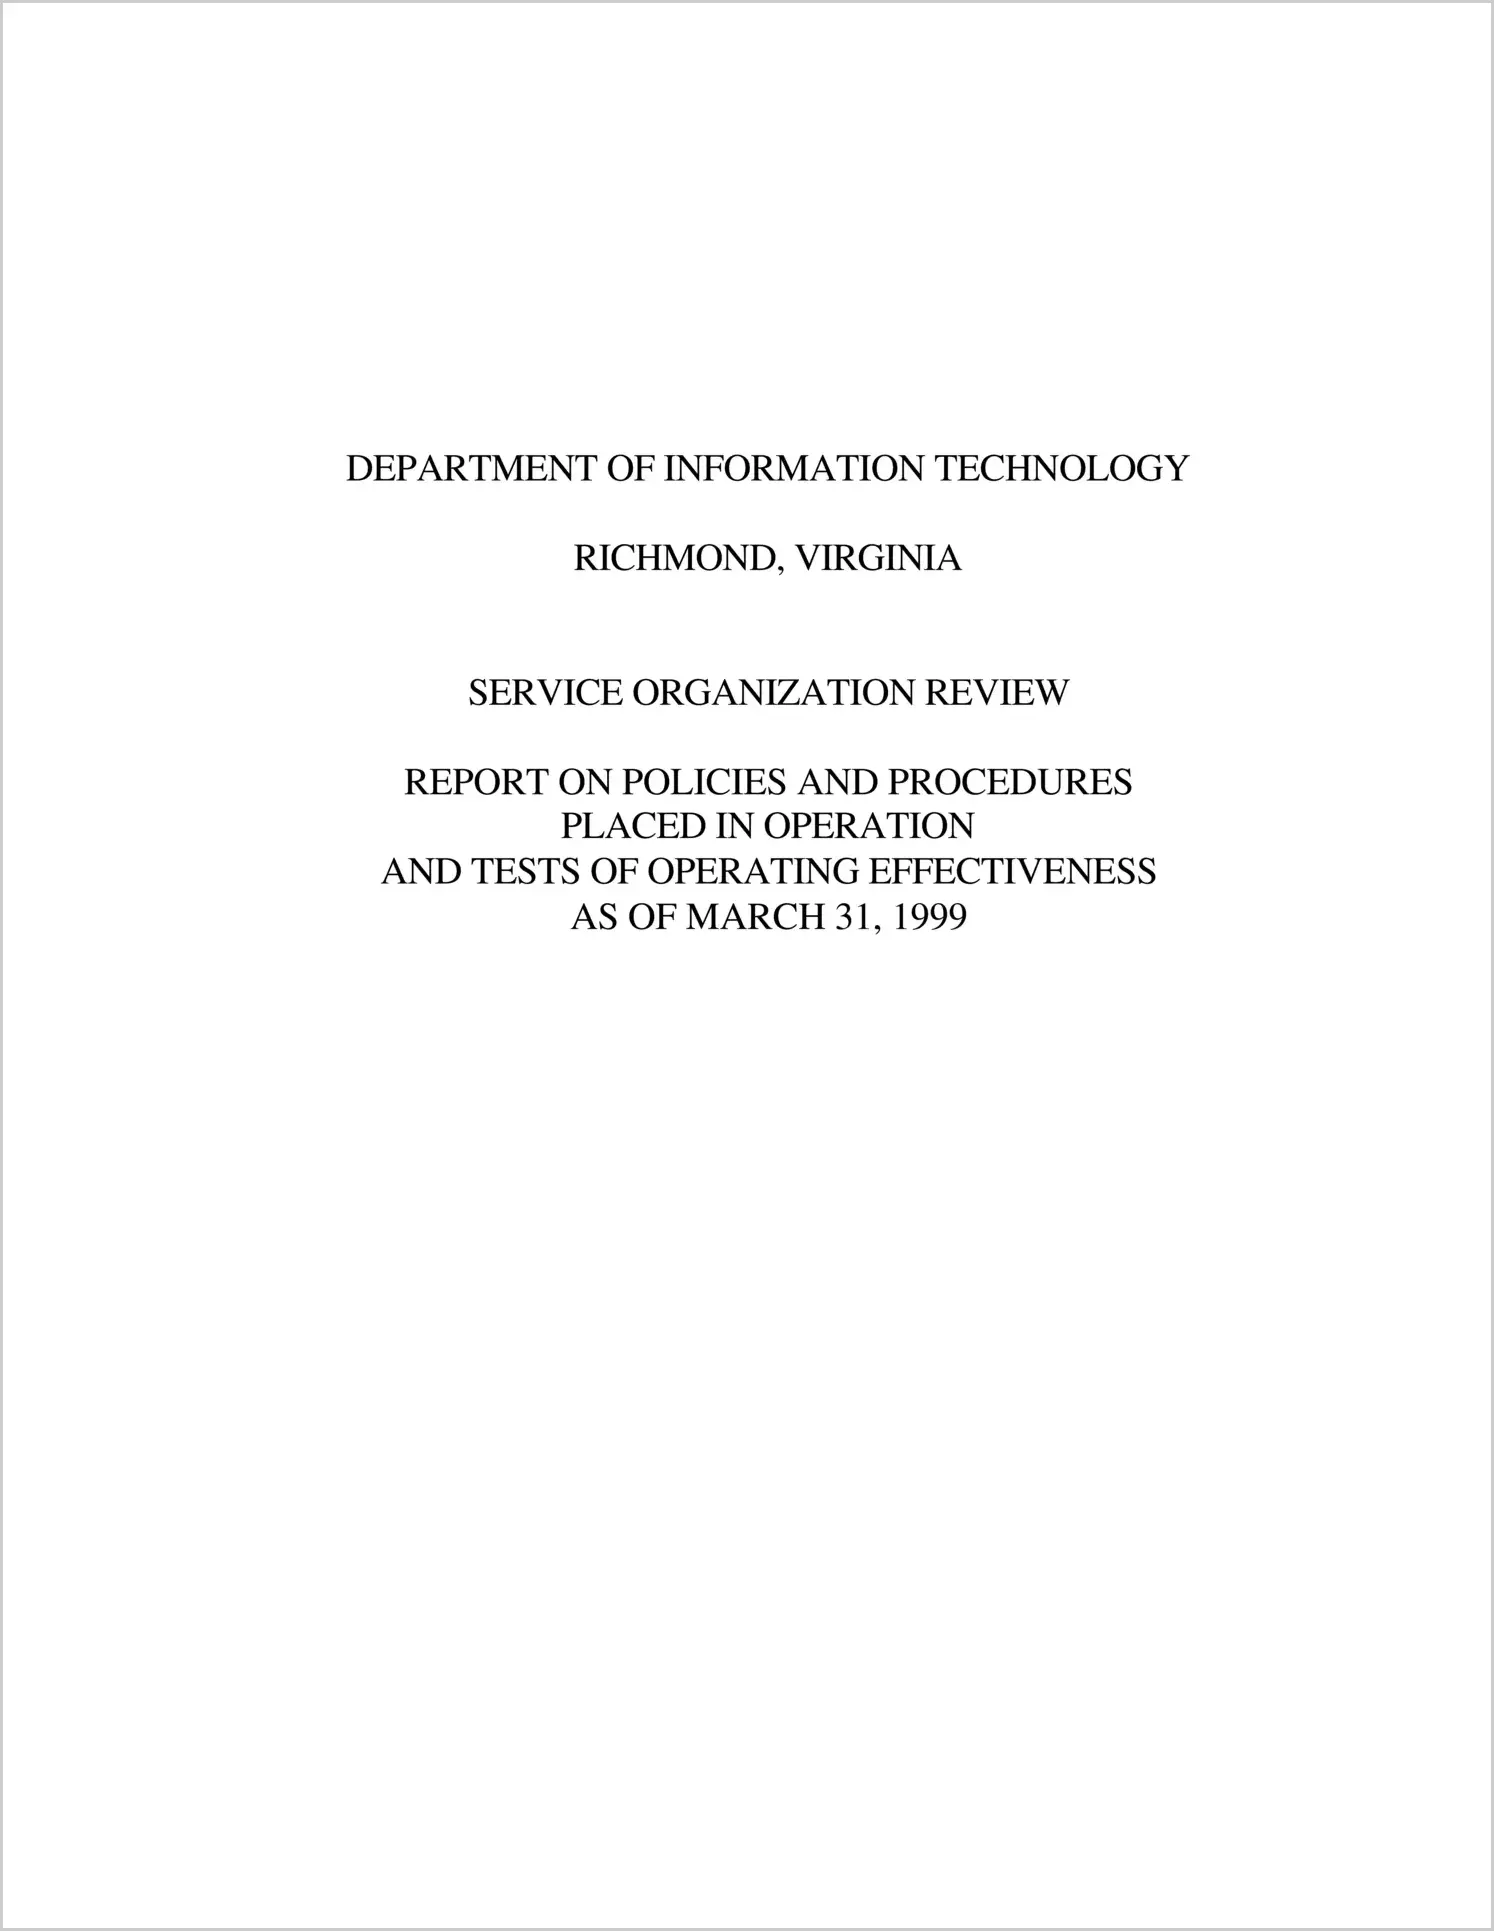 Special ReportDepartment of Information Technology? Policies and Procedures Placed in Operation as of March 31, 1999 (Statement on Auditing Standards No.70)(Report Date: 3/31/1999)